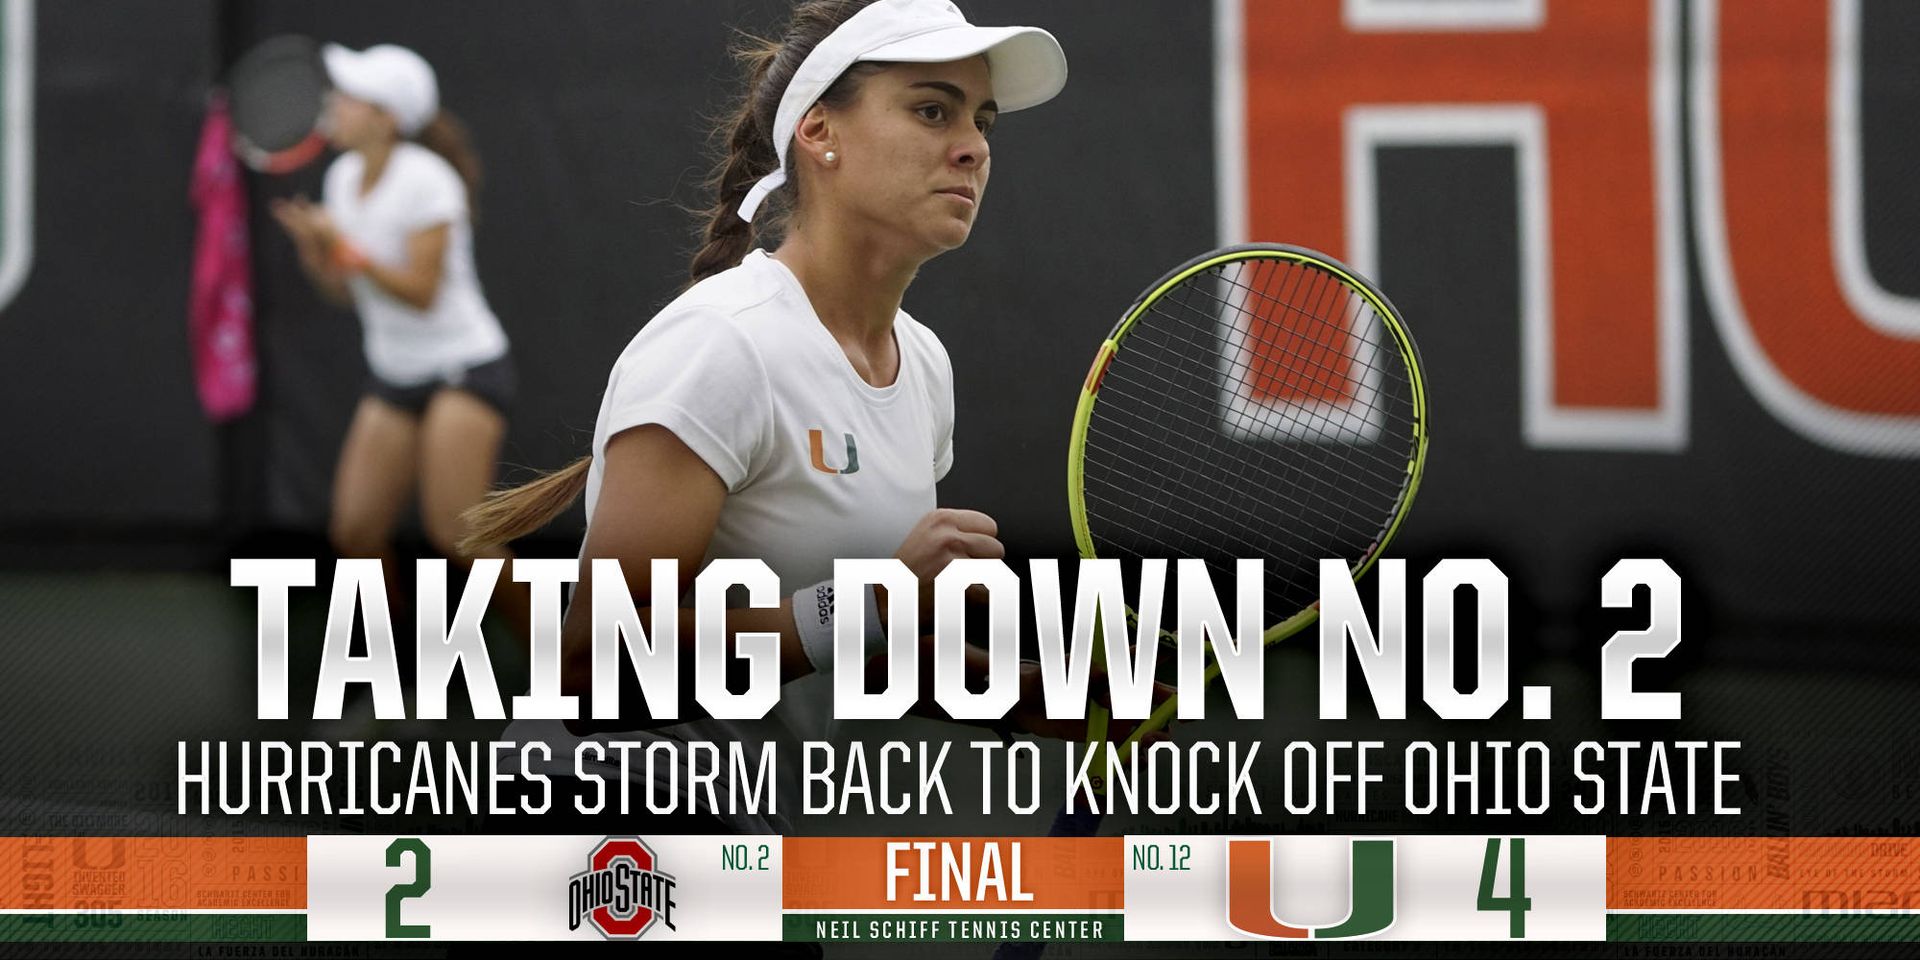 @CanesWTennis Topples Second-Ranked Buckeyes, 4-2